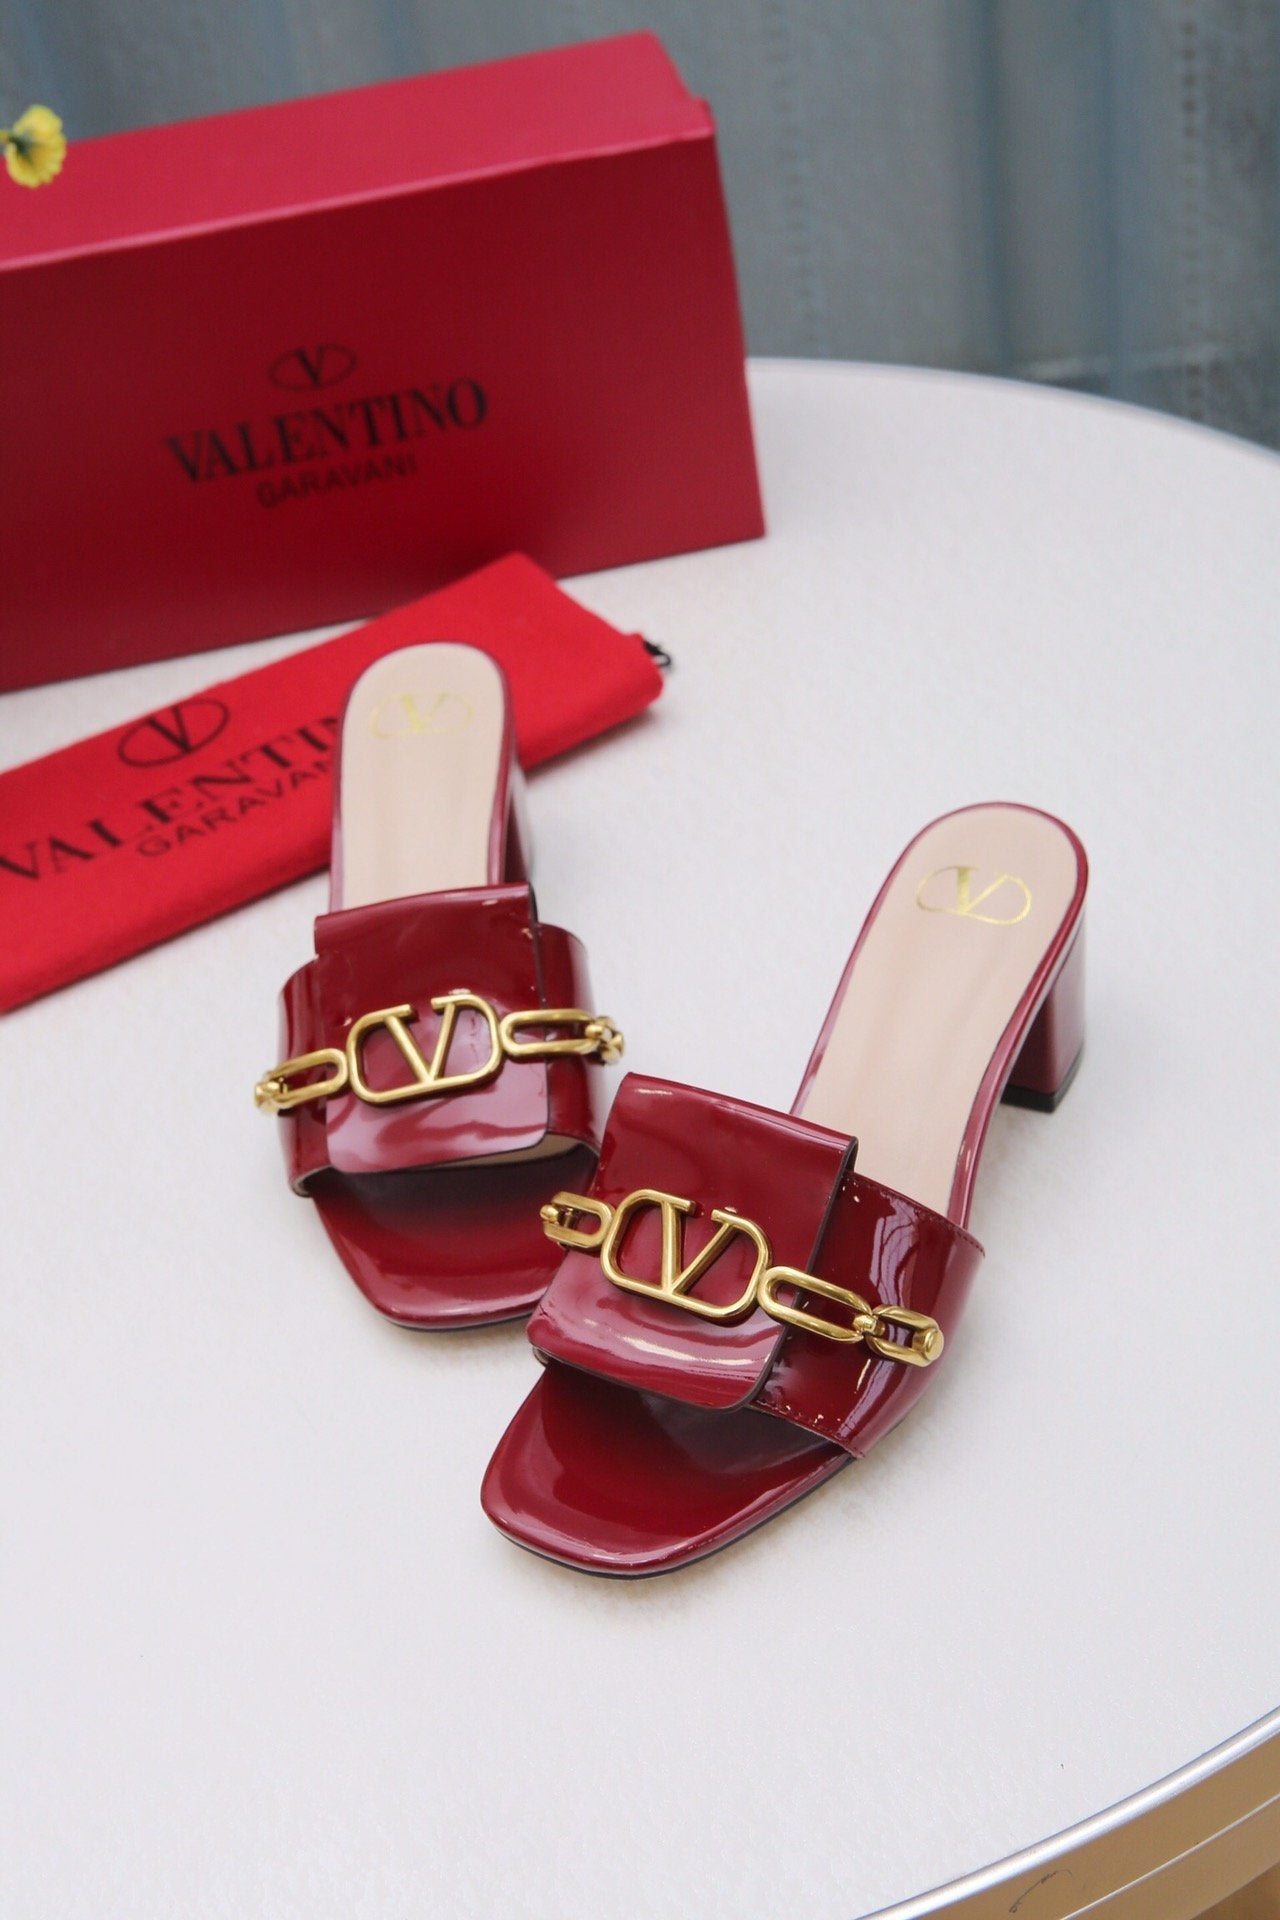 Valentino 2022 New Women Fashion Leather Casual High Heeled Shoe